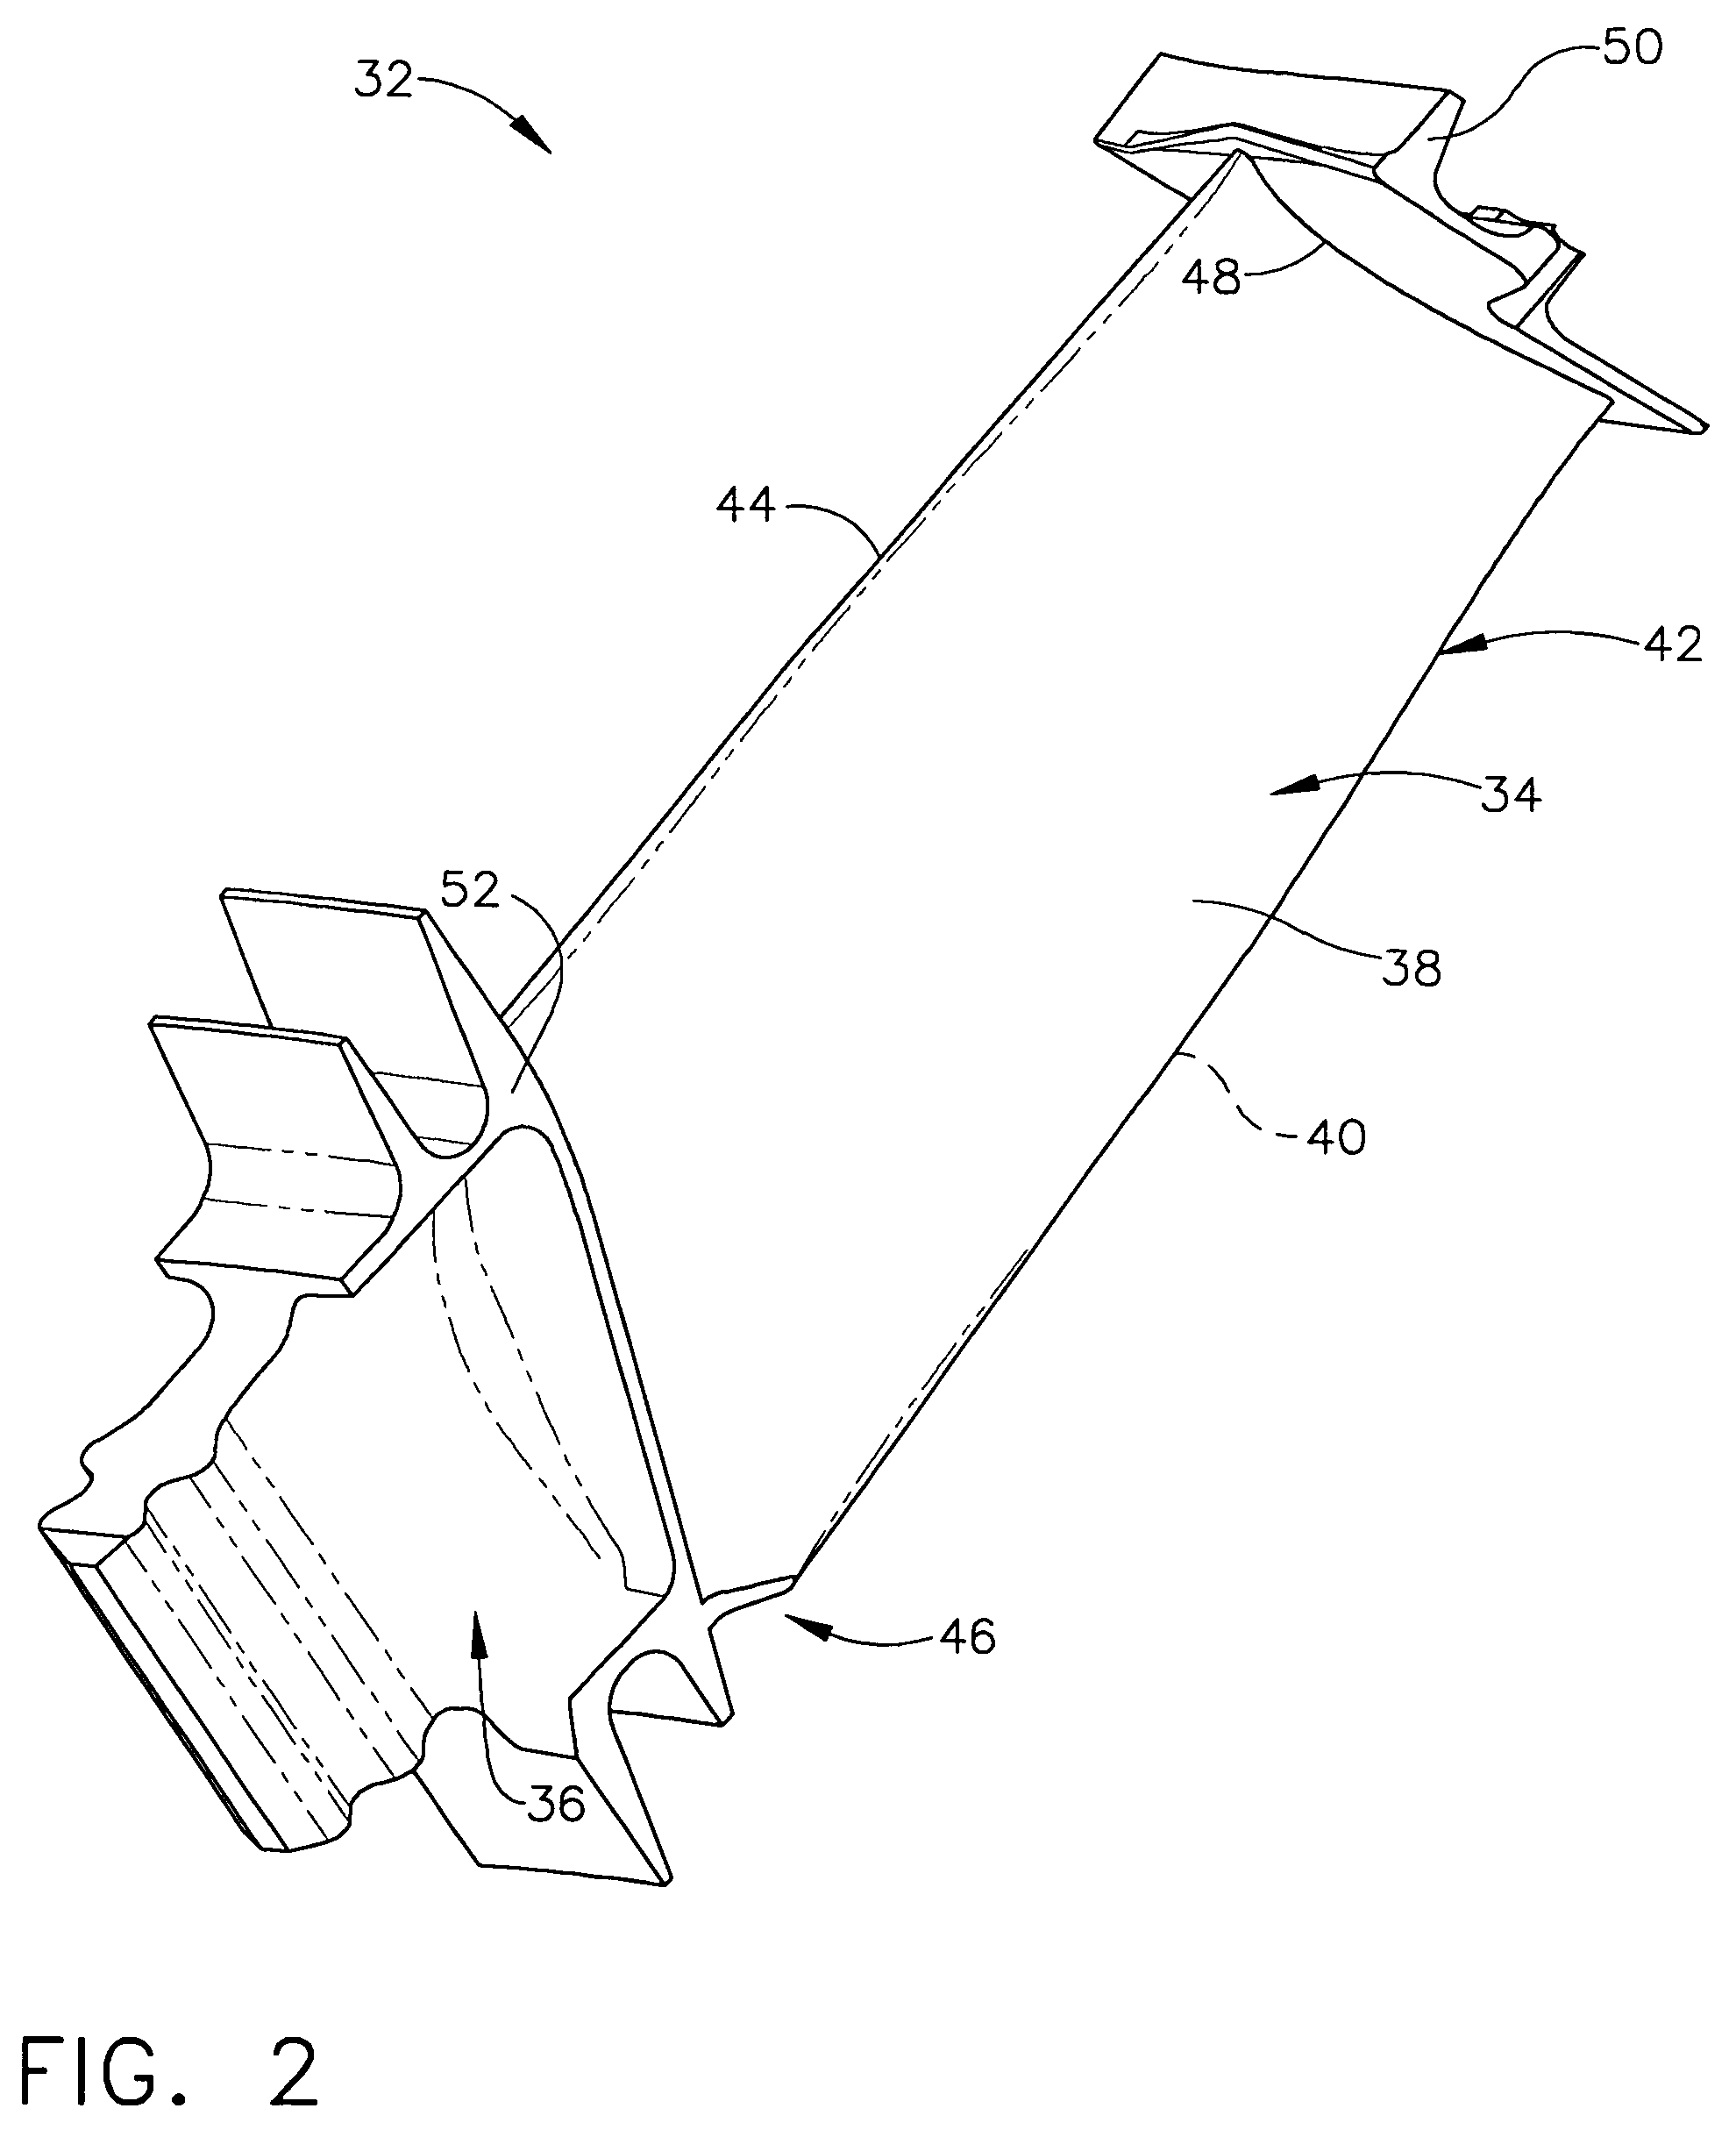 Methods and apparatus for manufacturing components